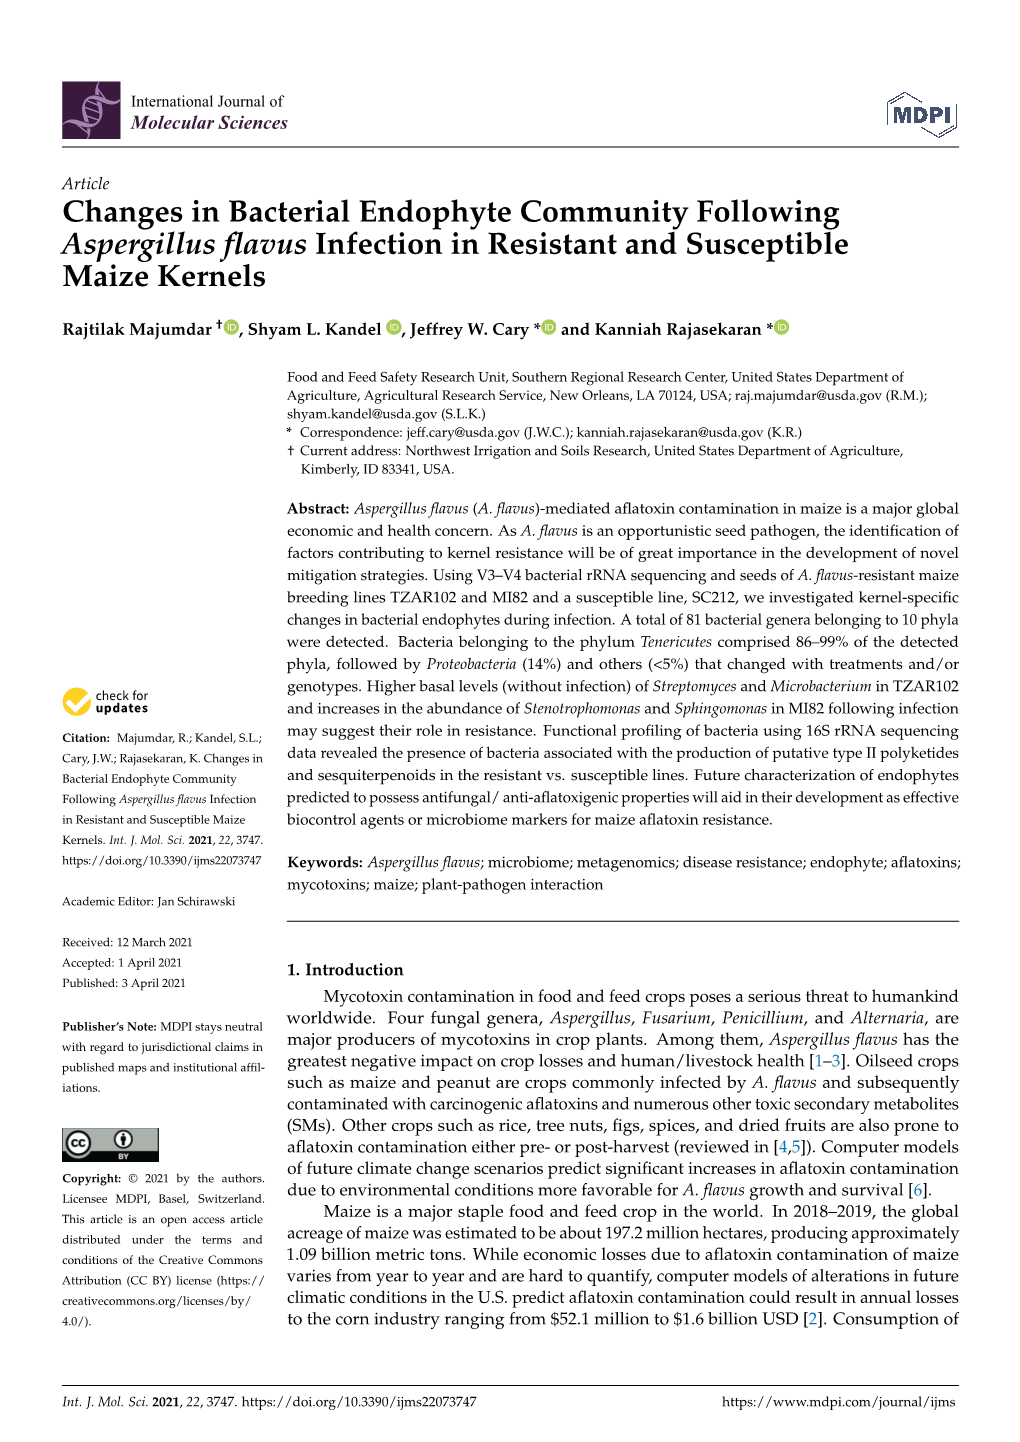 Changes in Bacterial Endophyte Community Following Aspergillus ﬂavus Infection in Resistant and Susceptible Maize Kernels